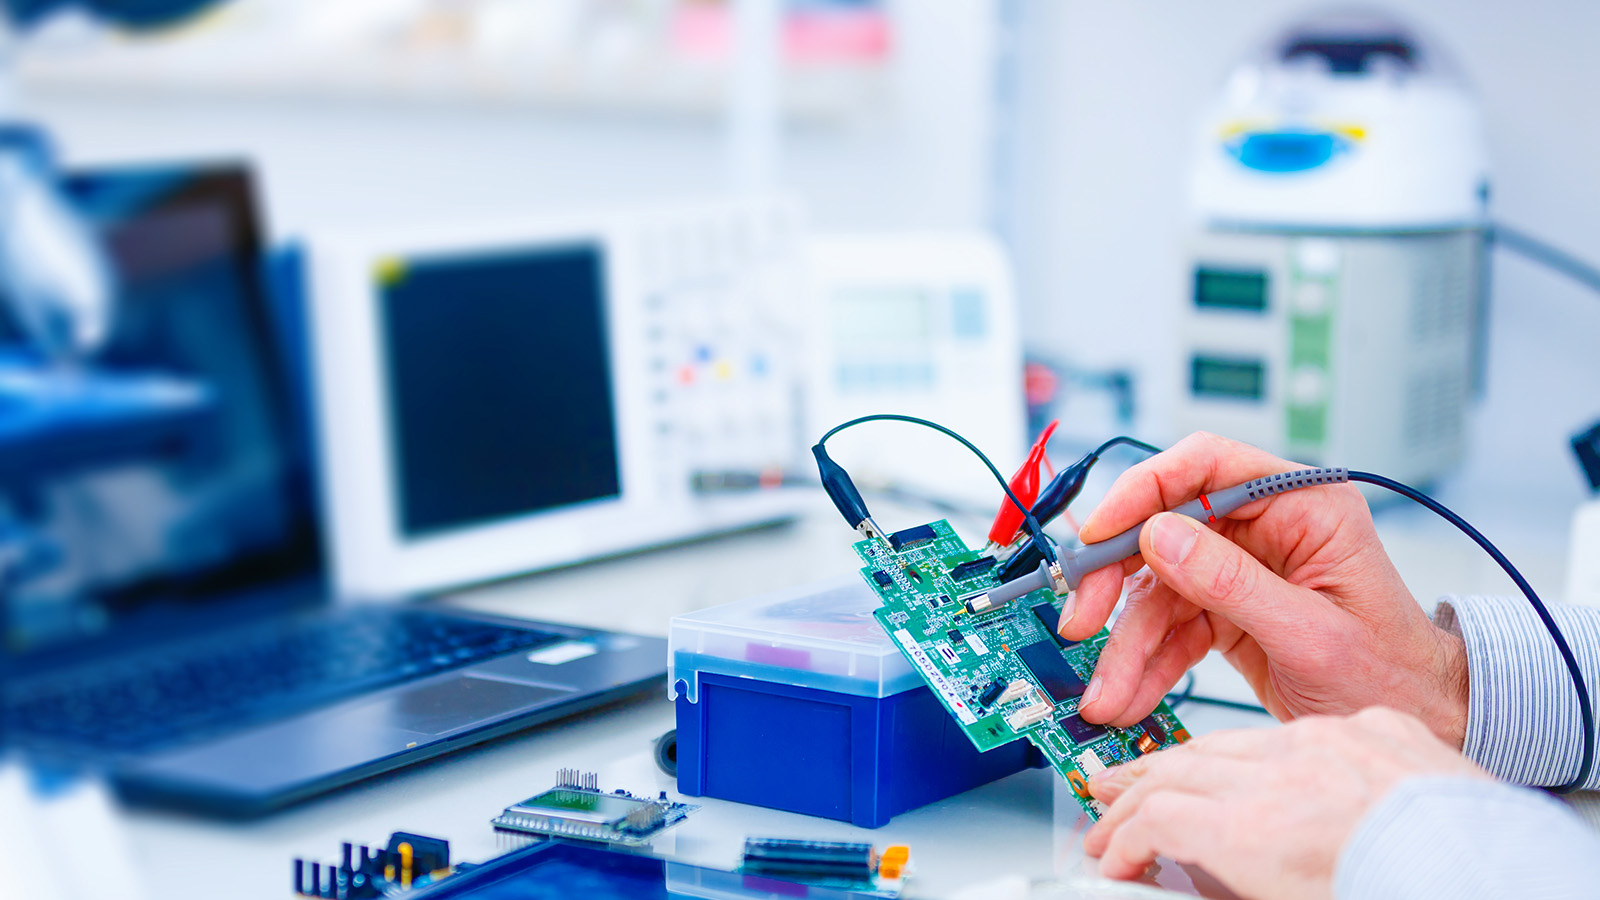 Key skills to be a successful Embedded System Engineer